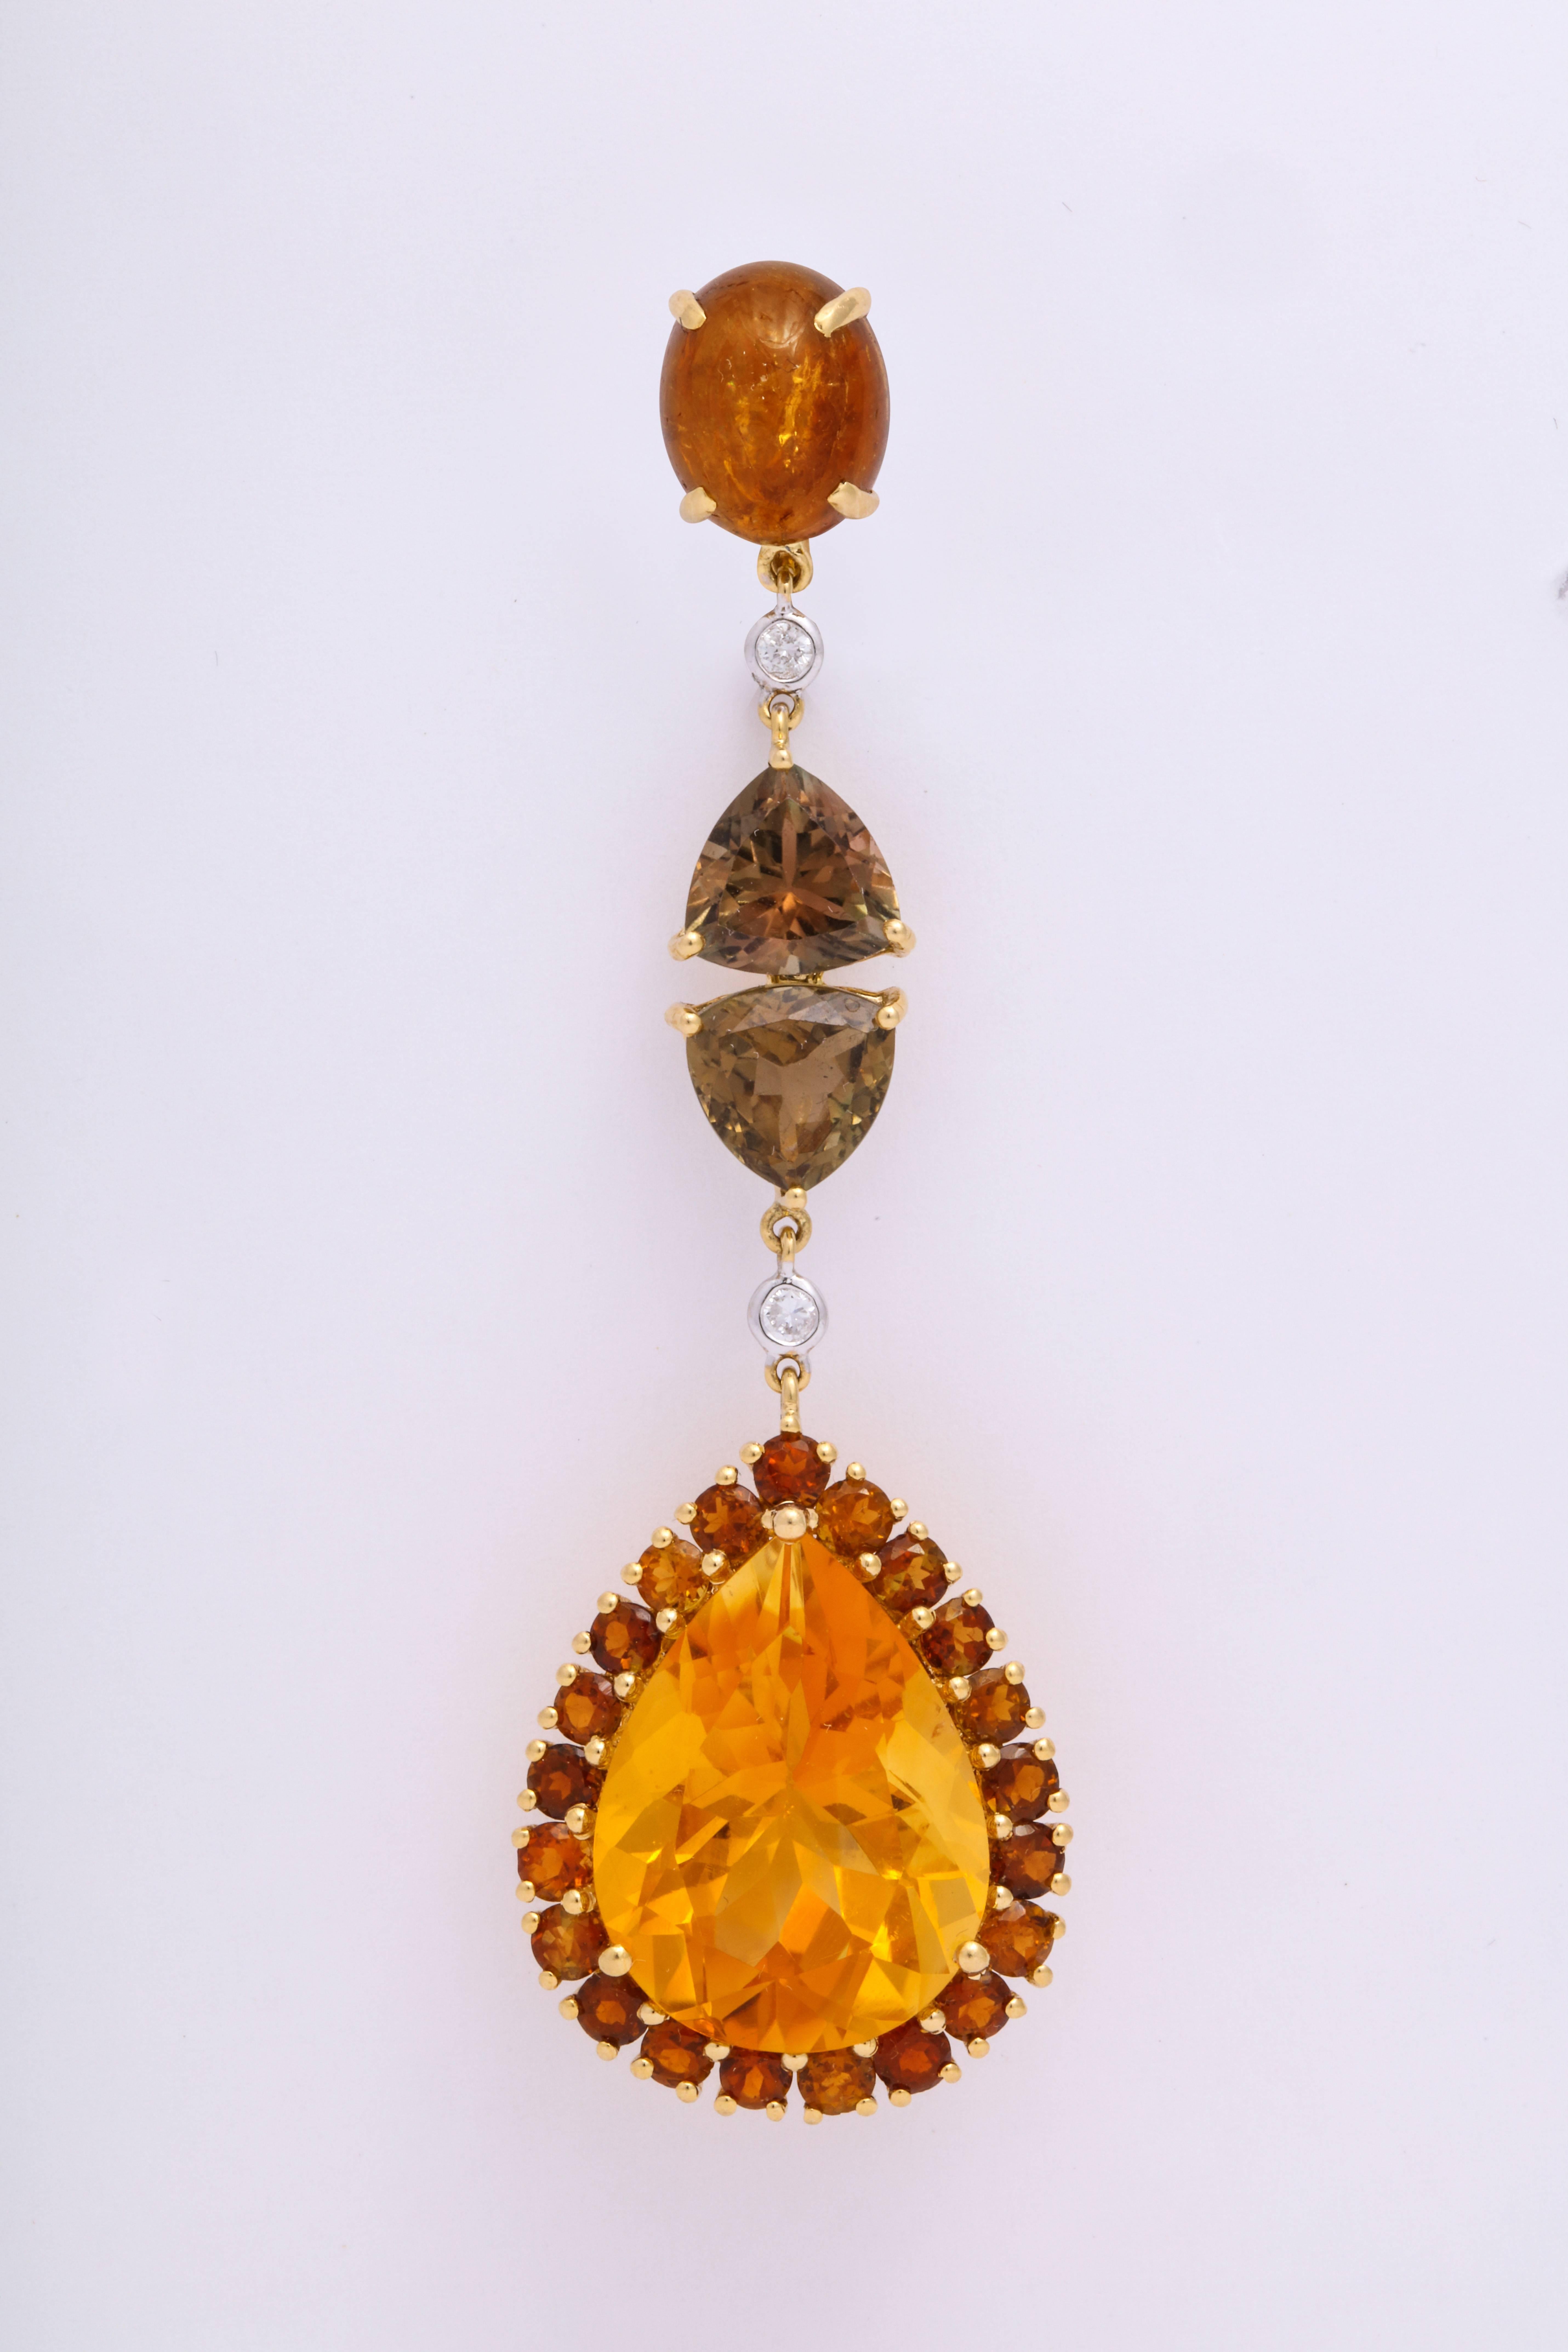 Hippie chic 18 Karat yellow gold ear pendant earrings mounted with cabochon yellow tourmaline, greenish gold trillion tourmaline, and pear shaped citrine drops with a surround of round multi-color golden tourmaline. Each component is attached to the